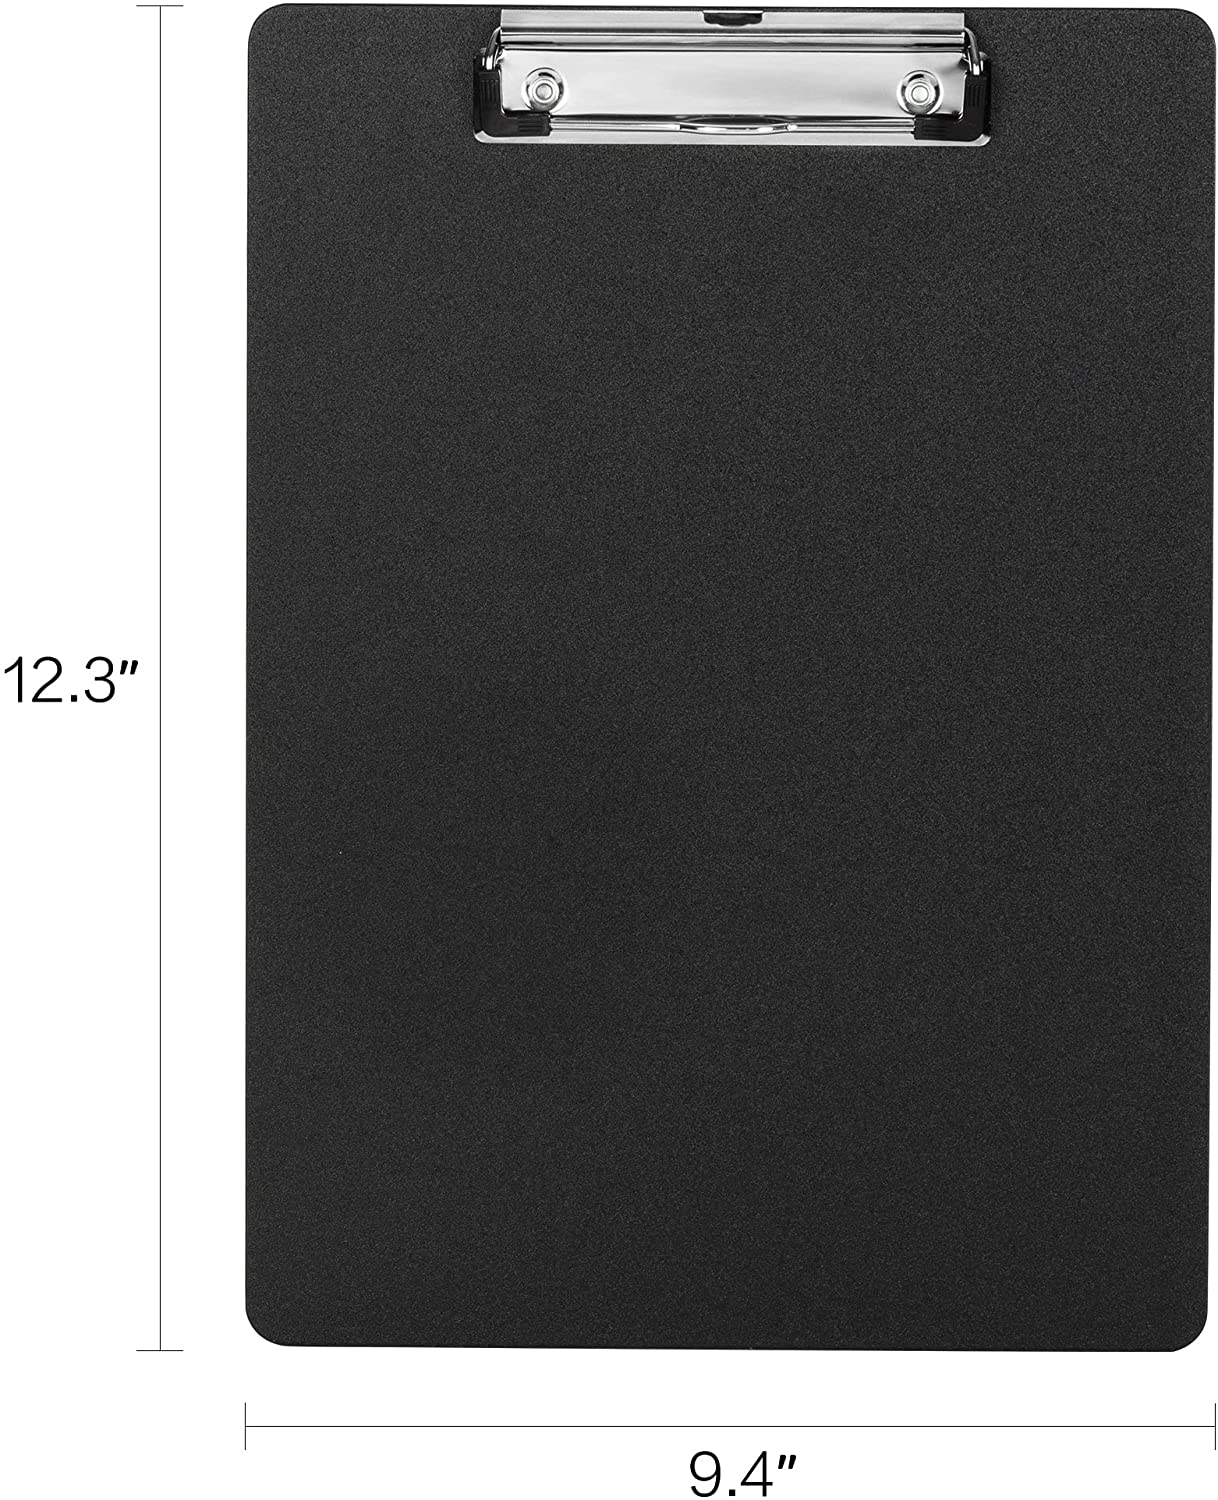 Deli Plastic Clipboard, Clip Board with Low Profile Clip, Standard A4 Letter Size Clipboards for Nurses, Students, Office and Women, Black, 2 Pack